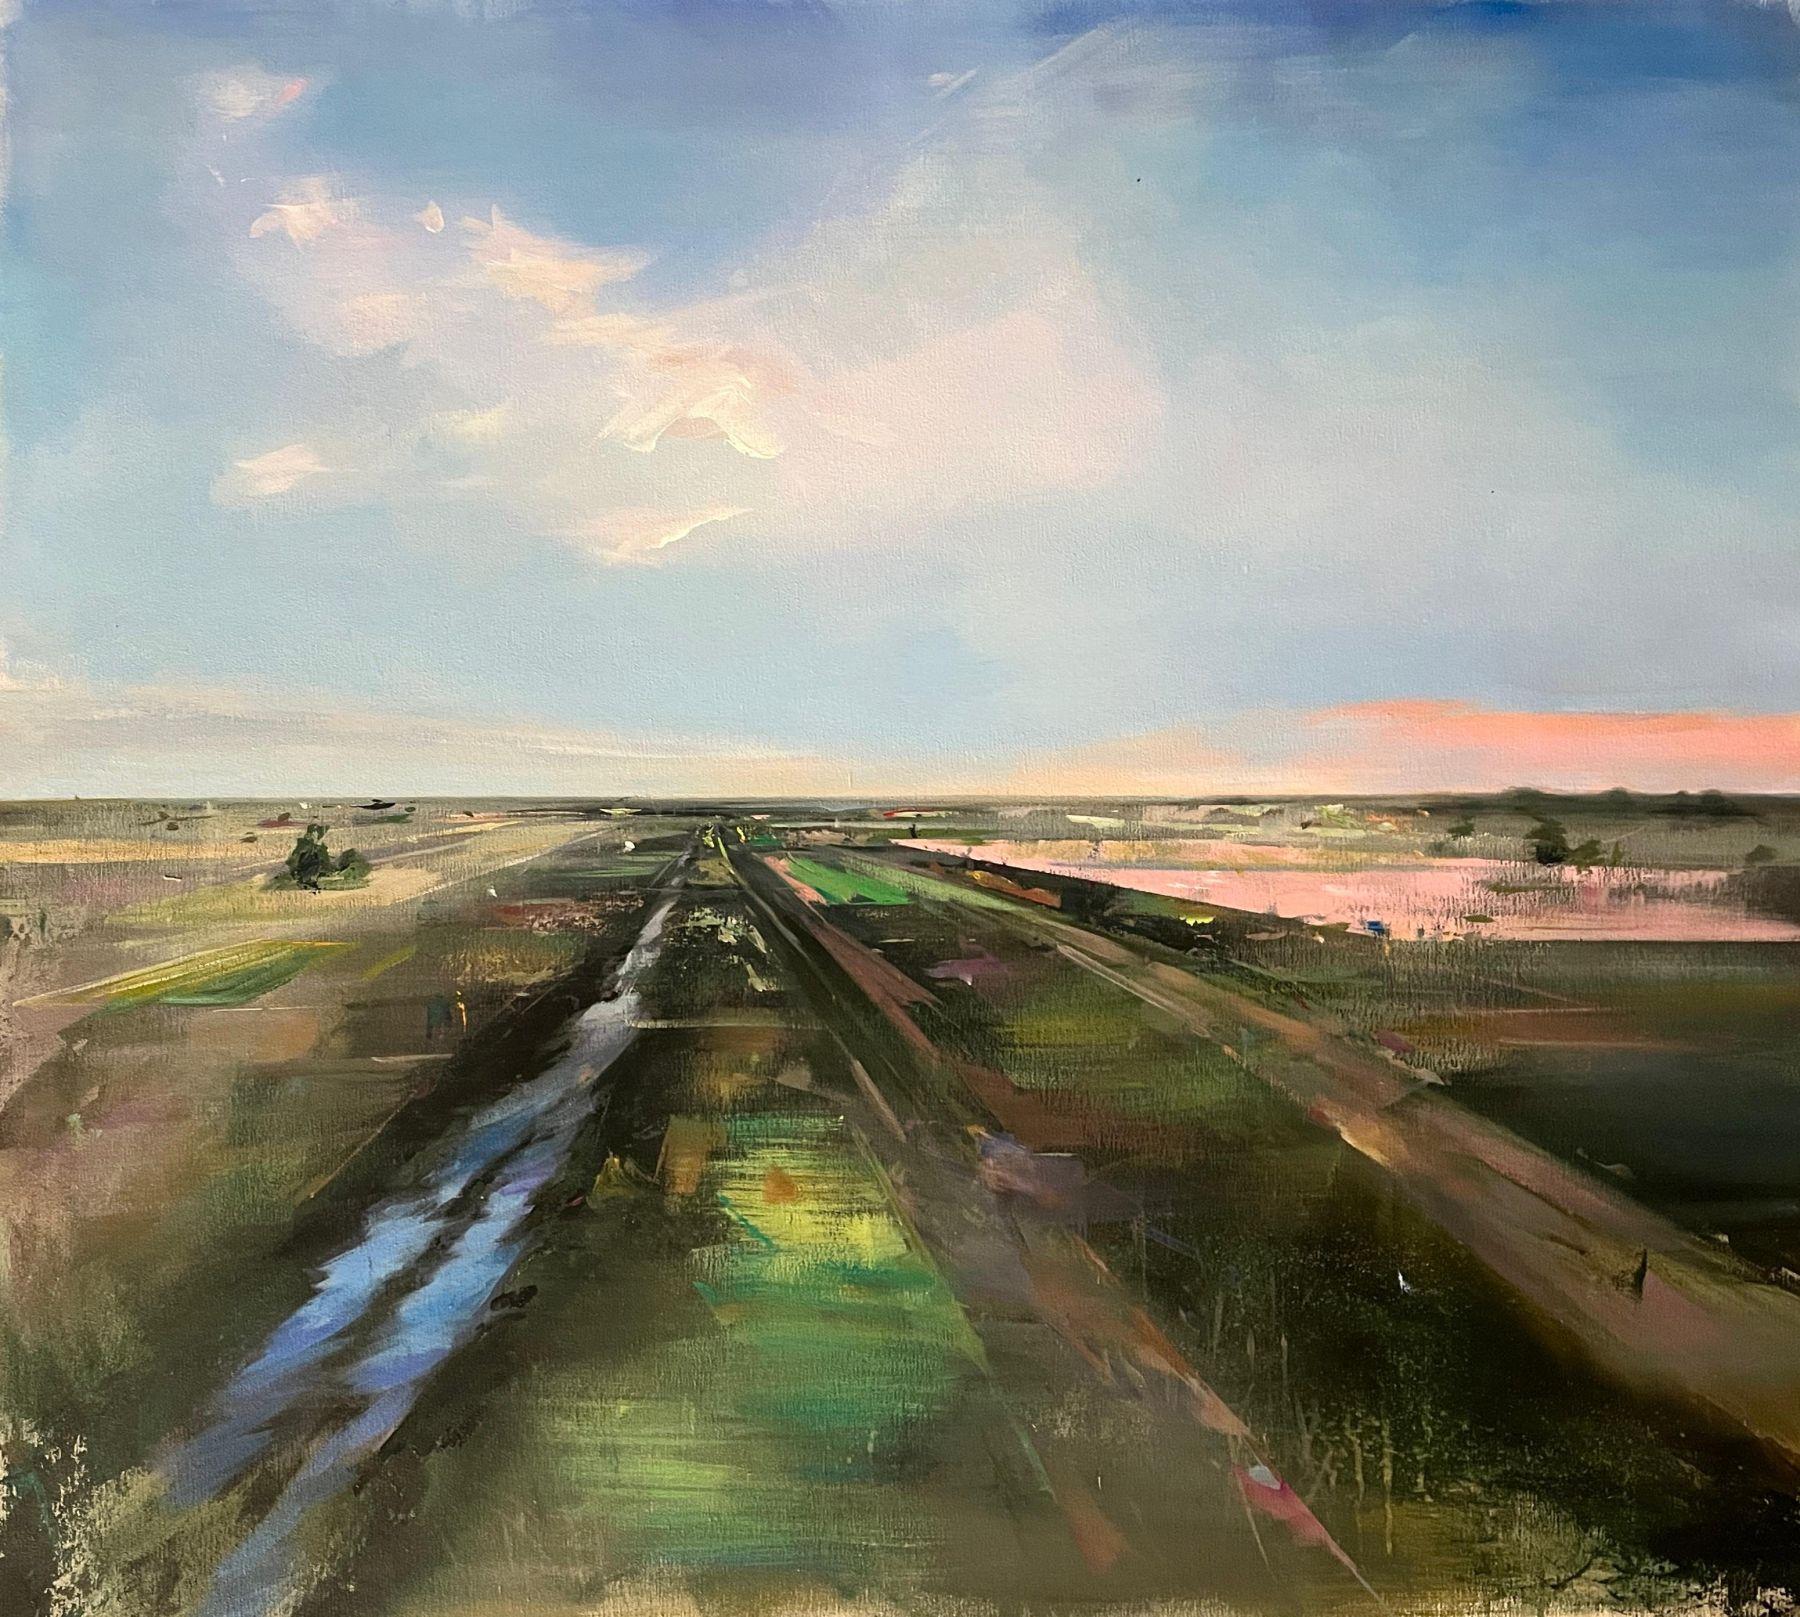 "Distant Horizon" is 38x42 oil painting on canvas by artist Jamie Crisol. Feature is an abstracted landscape aerial view of a rural field in greens, browns, and pinks. Leading lines giving the impression of well worn paths and irrigation lead the